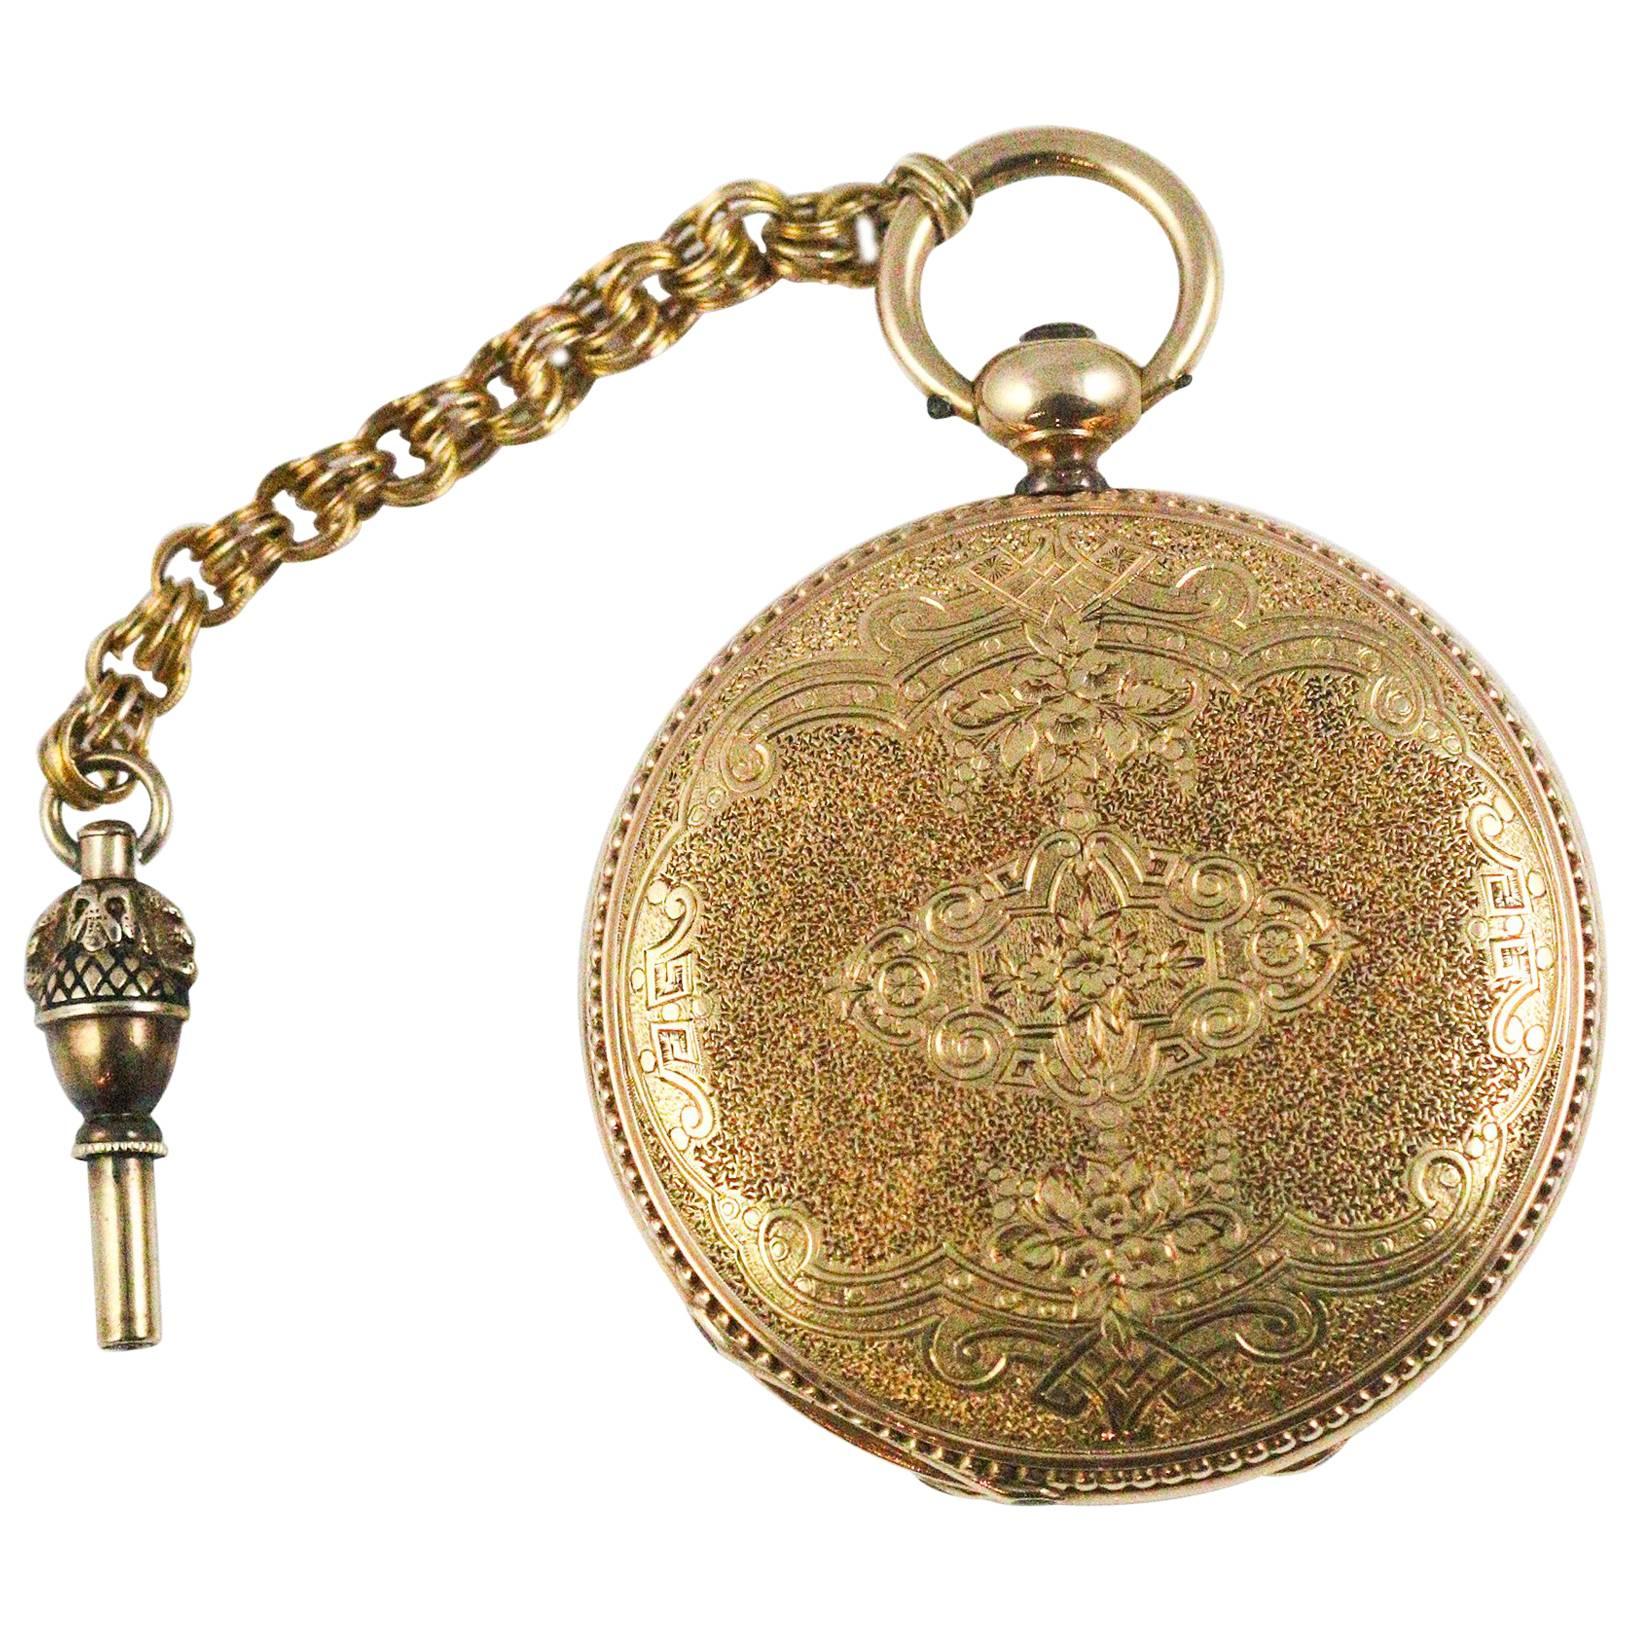 Bautte & Co. Yellow Gold Mid-1800s Pocket Watch with Key